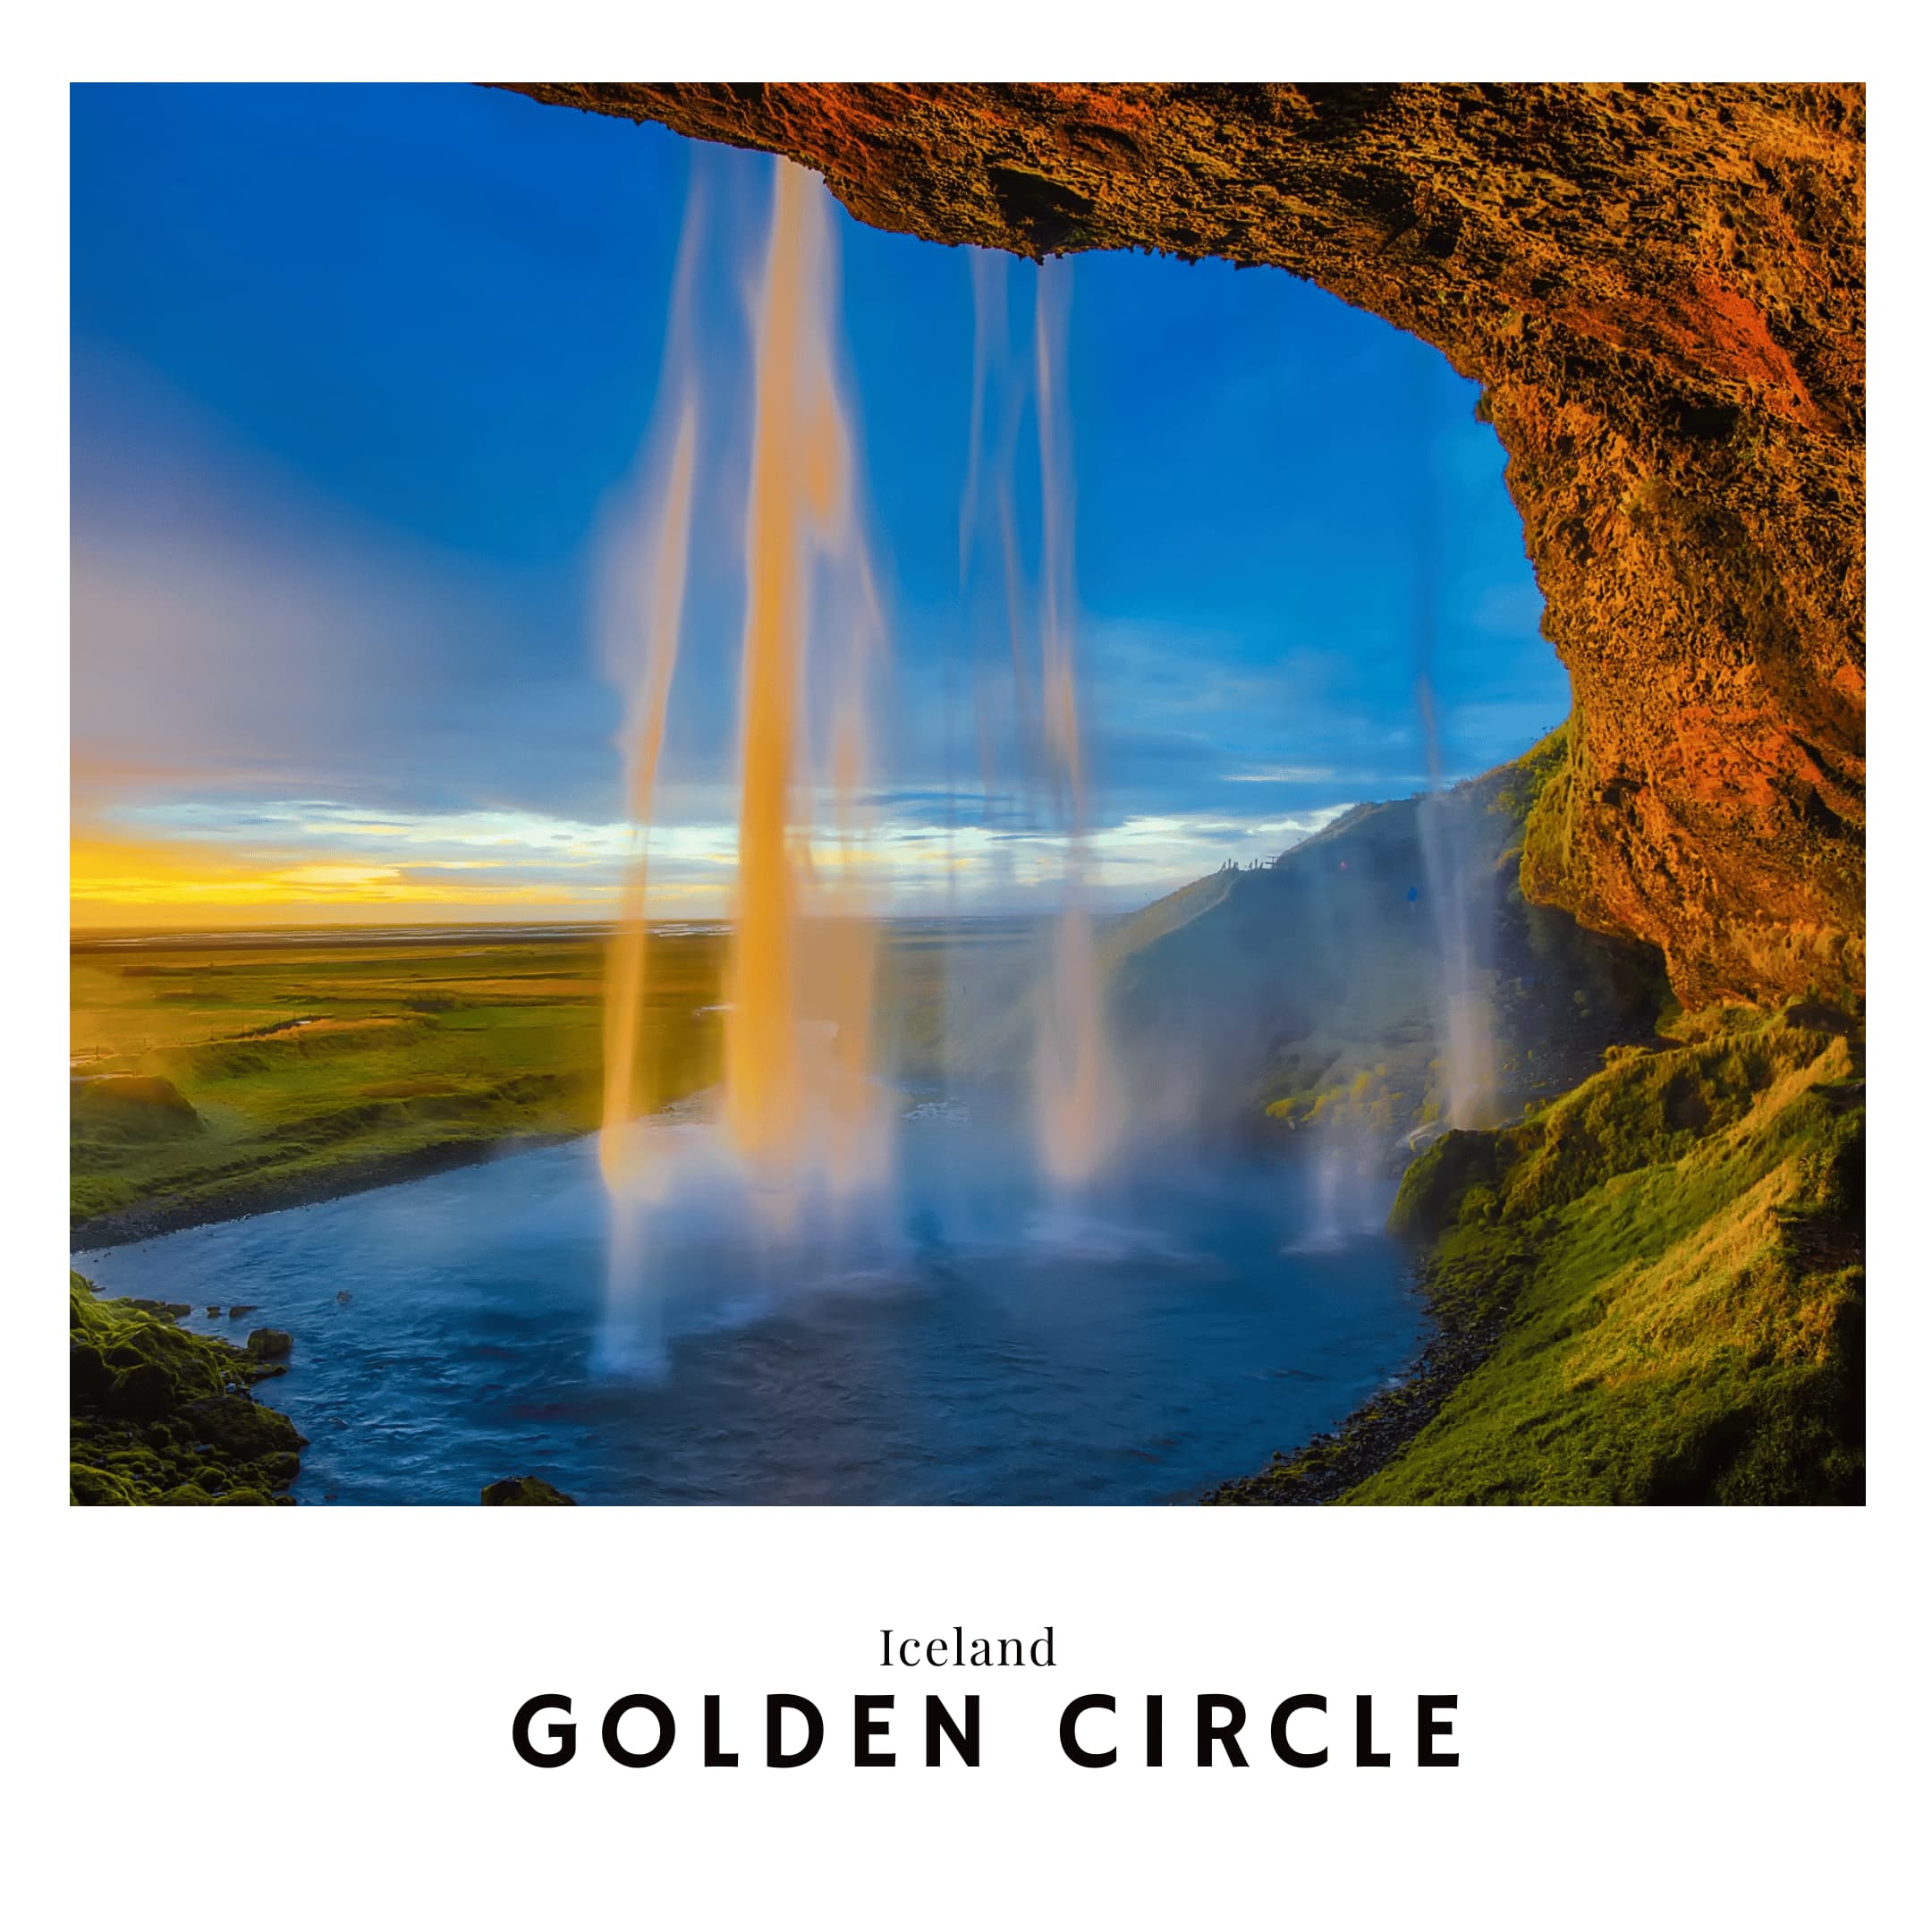 Link to Golden Circle Travel Guide in Iceland